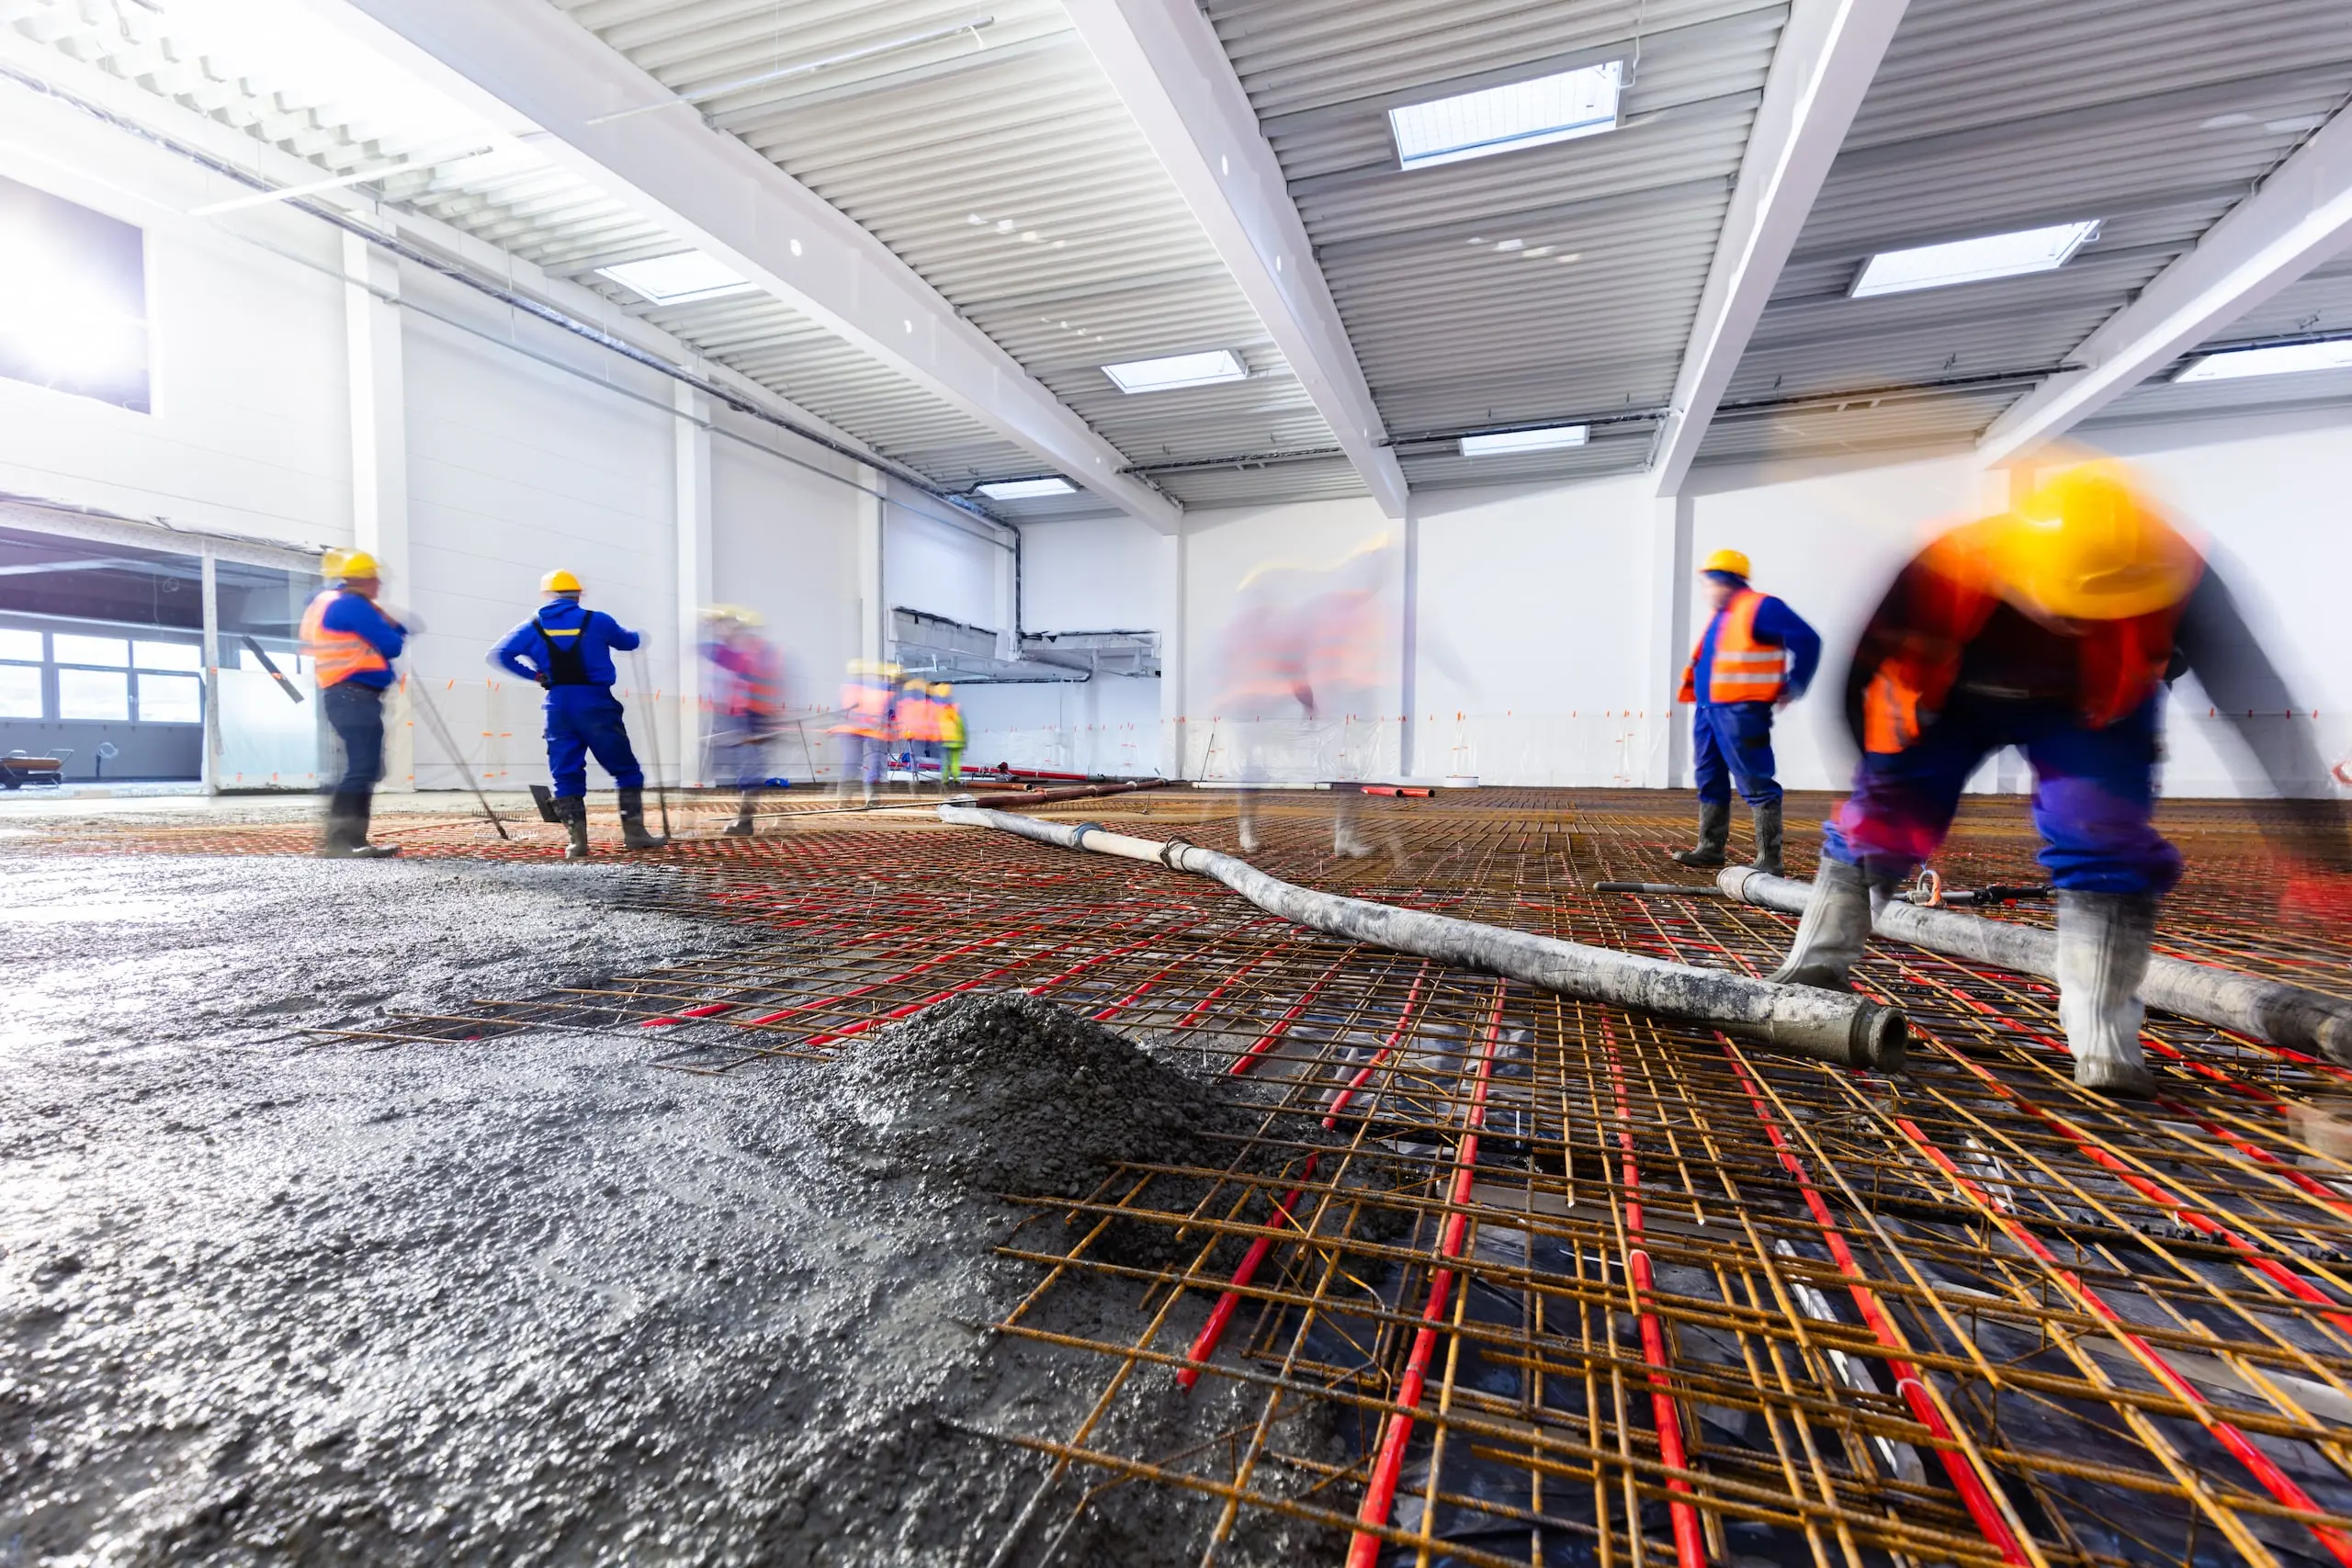 workers-do-concrete-screed-on-floor-with-heating-i-2022-12-16-11-08-23-utc-min